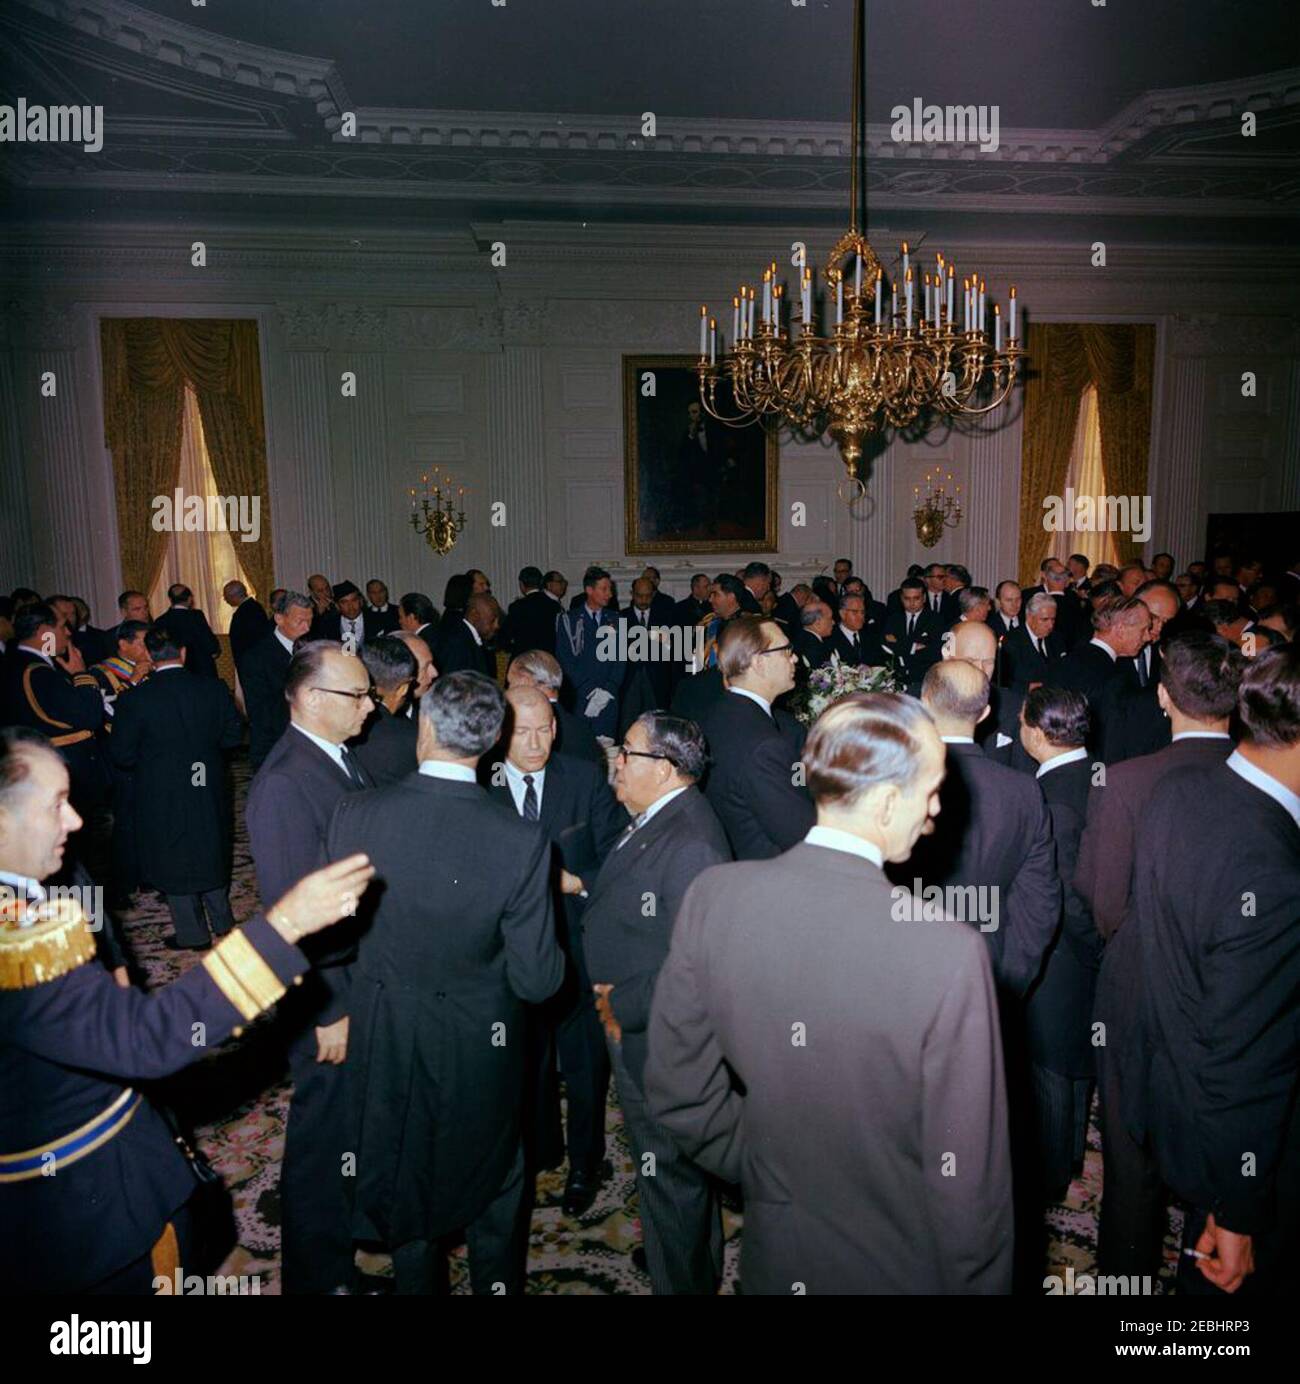 State Funeral of President Kennedy: White House, post funeral Reception. Guests attend a reception at the White House, following the state funeral of President John F. Kennedy. Those pictured include: Minister of Foreign Affairs of France, Maurice Couve de Murville; Minister of Foreign Affairs of Pakistan, Zulfikar Ali Bhutto; Minister of Foreign Affairs of Argentina, Dr. Miguel u00c1ngel Zavala Ortiz; Ambassador of Great Britain, Sir David Ormsby-Gore; Naval Aide to President Kennedy, Captain Tazewell Shepard; Julia Ann Shepard; Minister of Foreign Affairs of Panama, Galileo Solis; Prince Gh Stock Photo